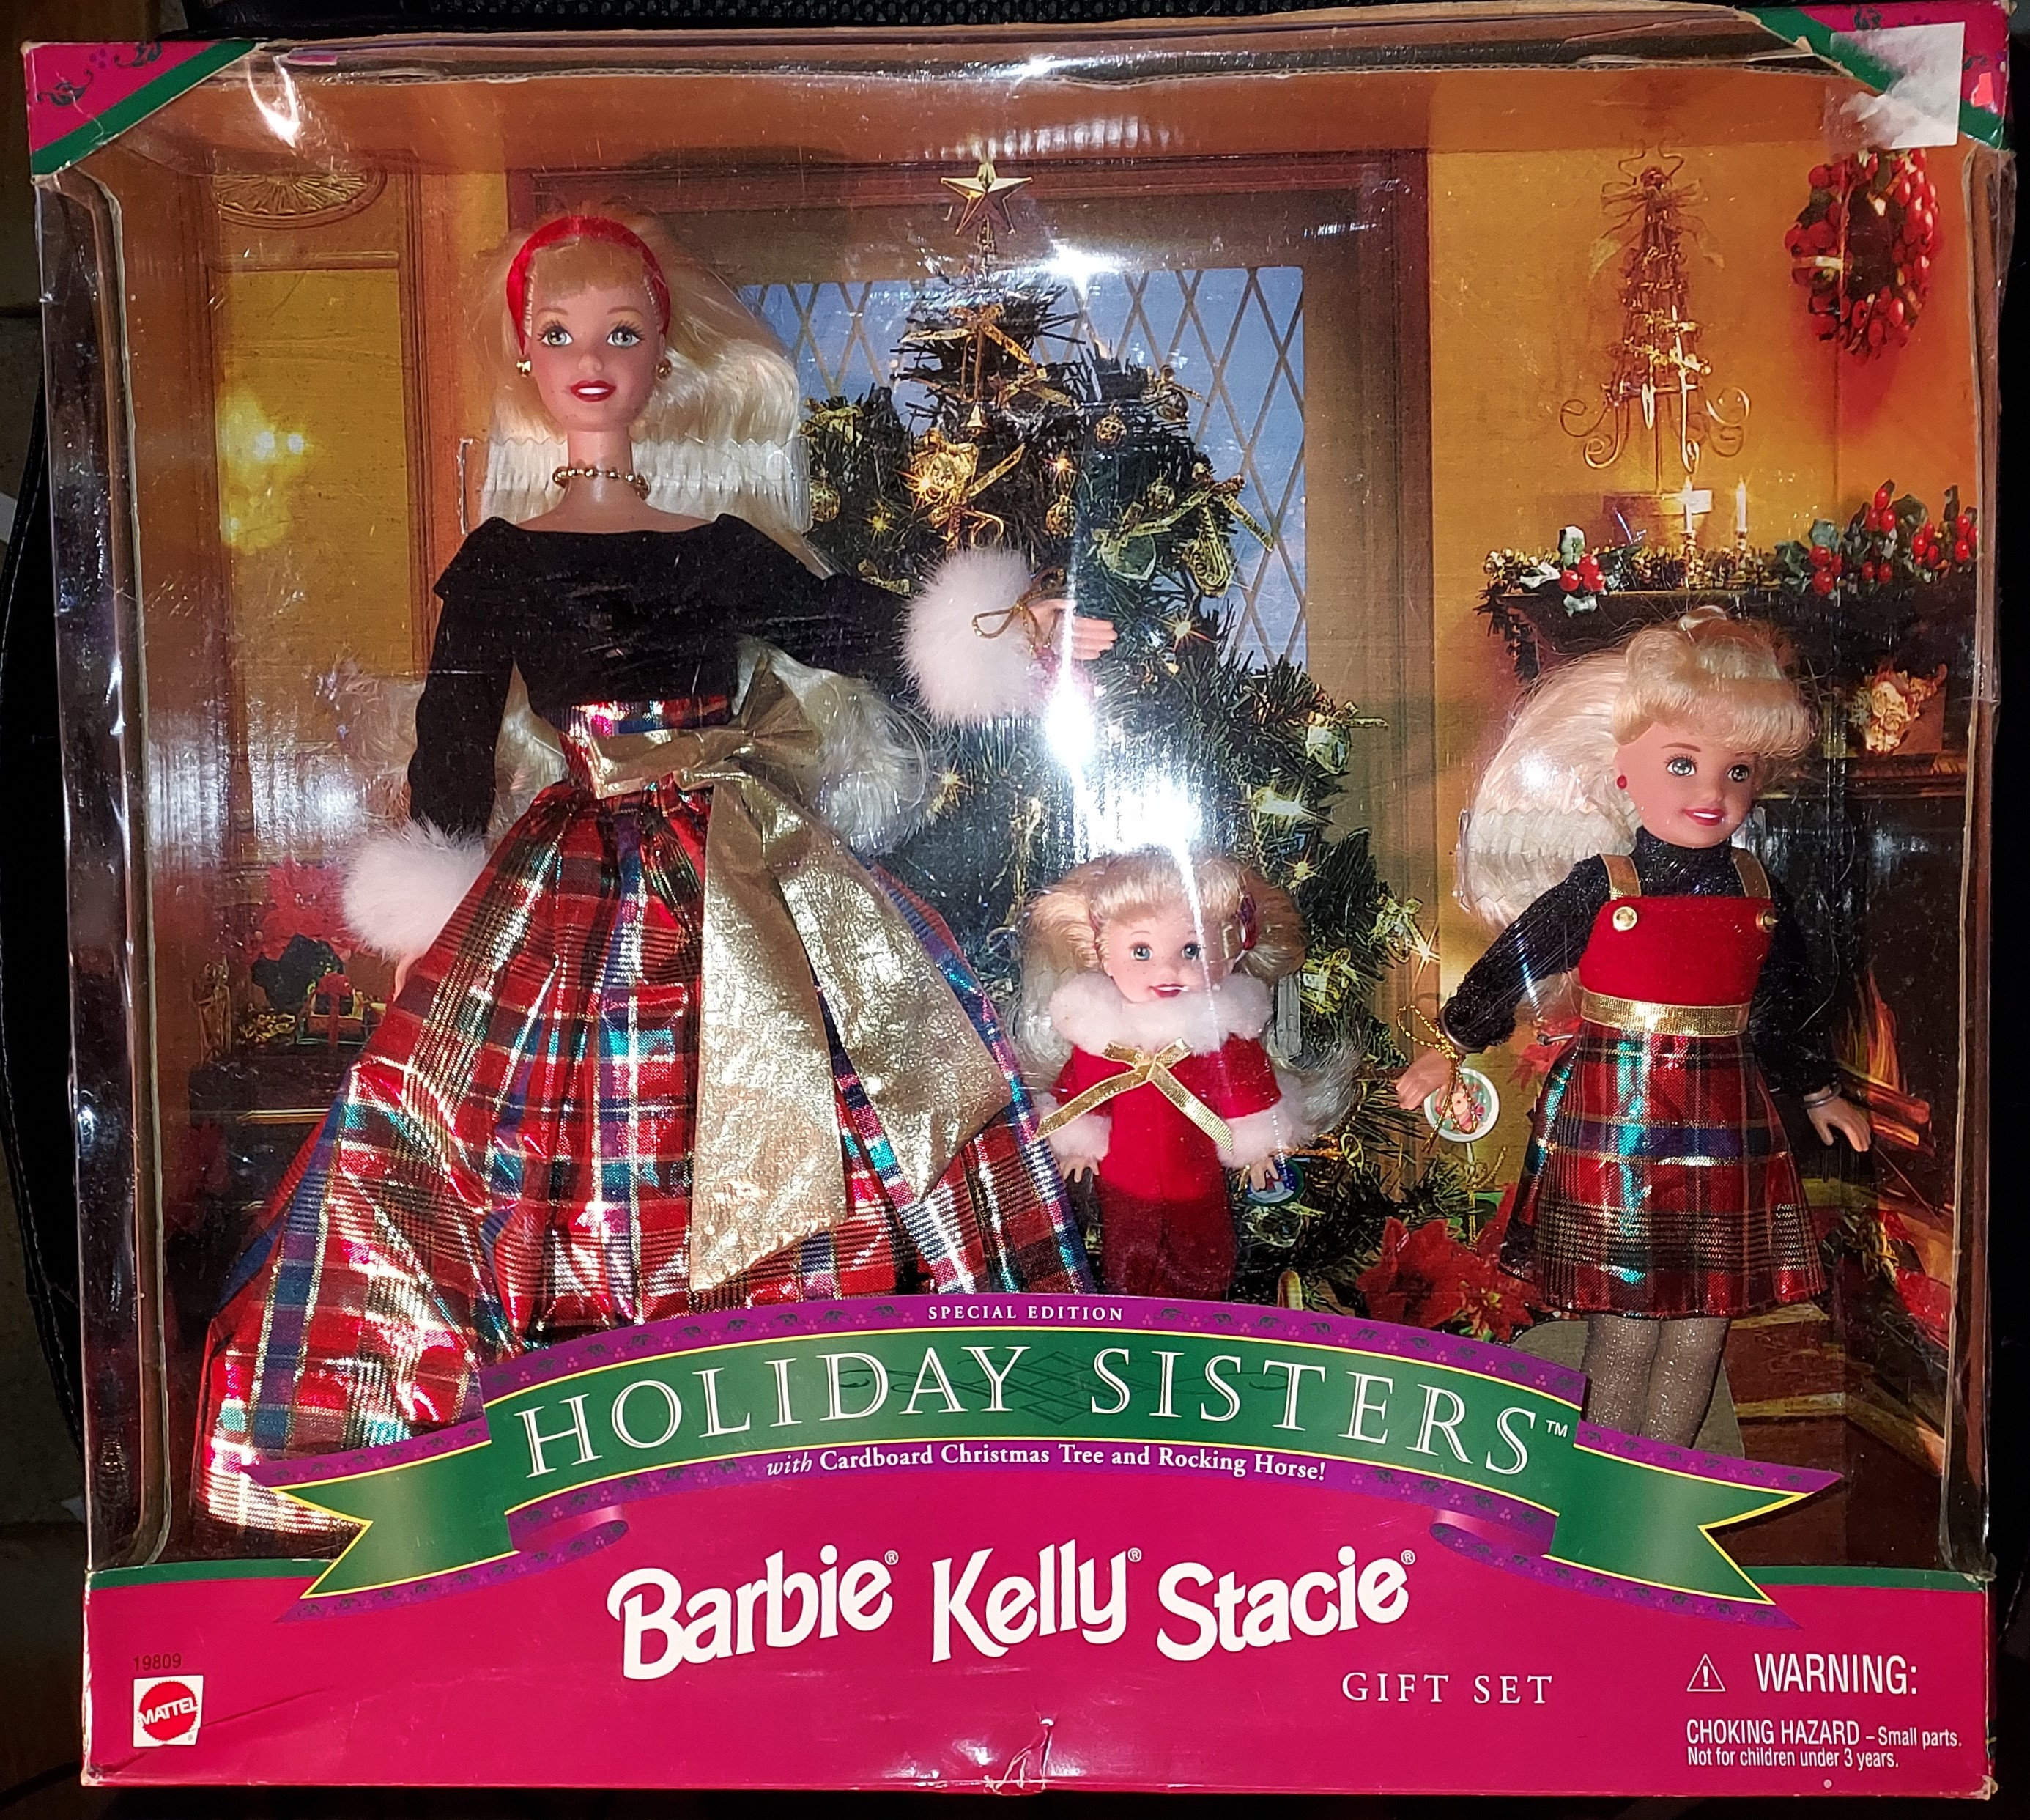 Barbie Kelly Friends of the World 3-Doll Gift Set by Barbie